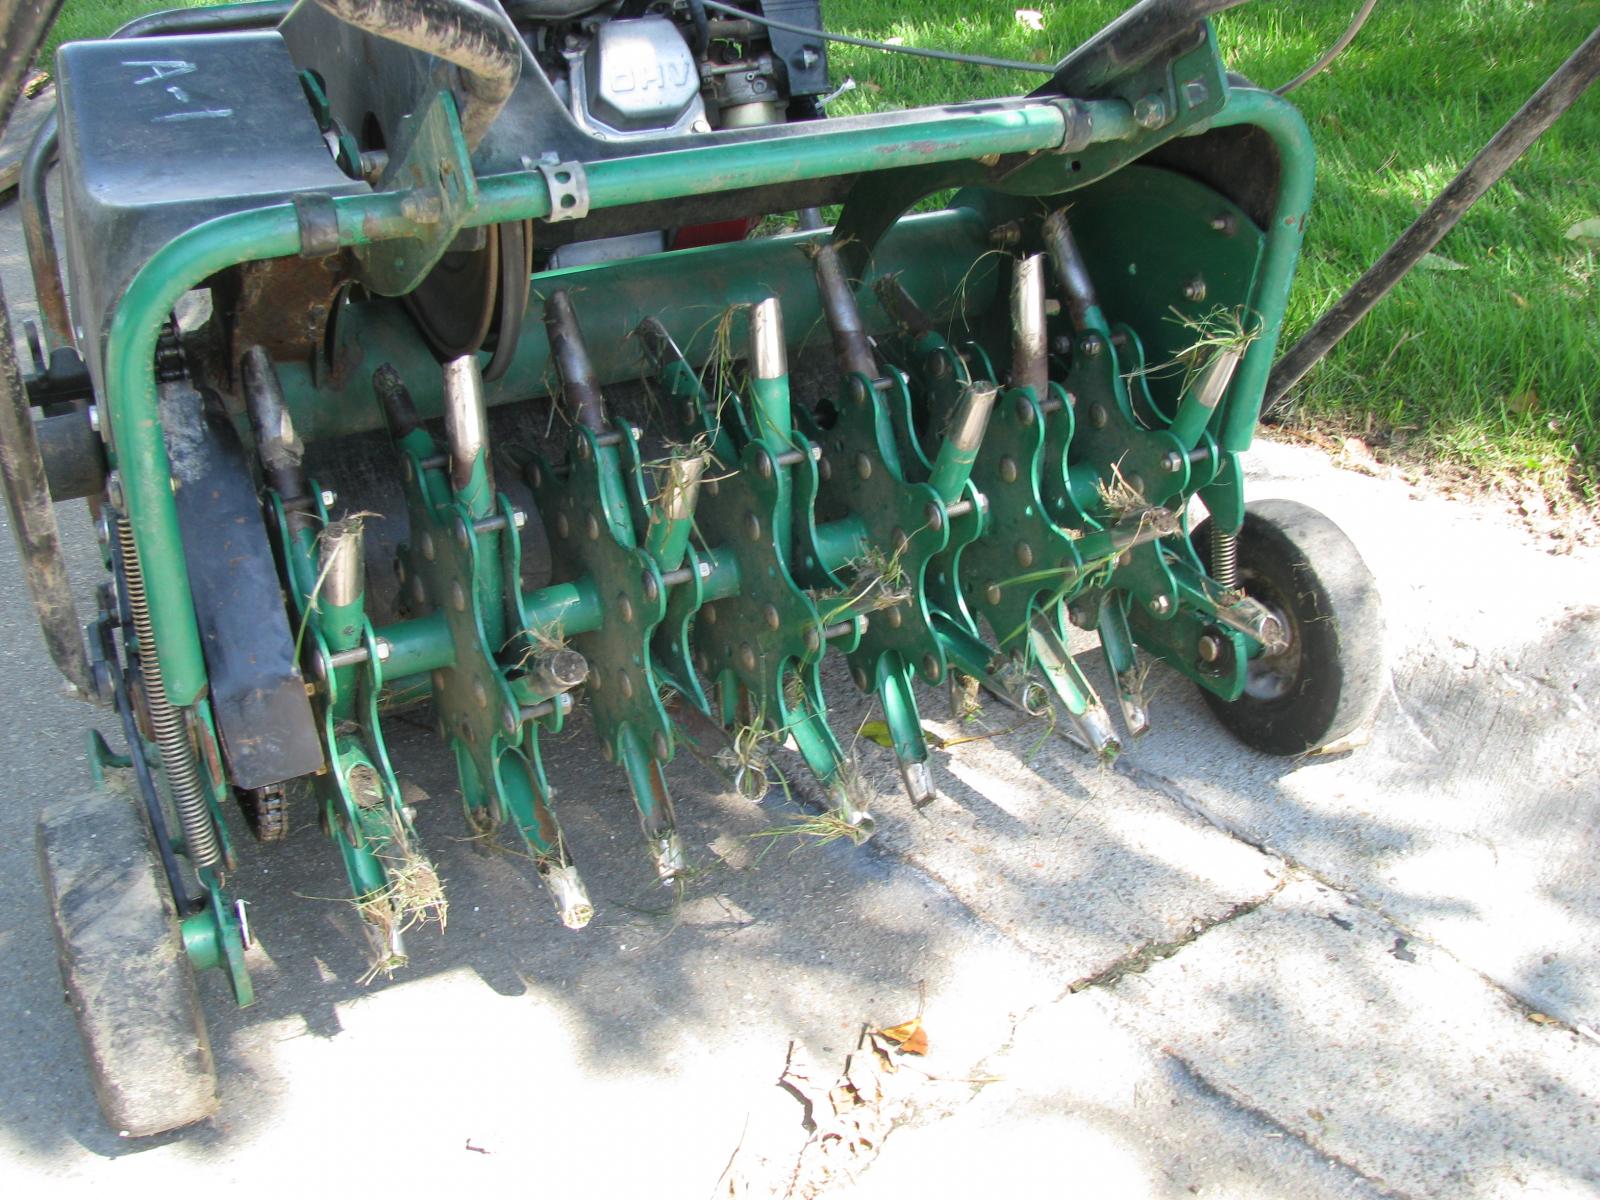 Image of lawn aeration equipment.